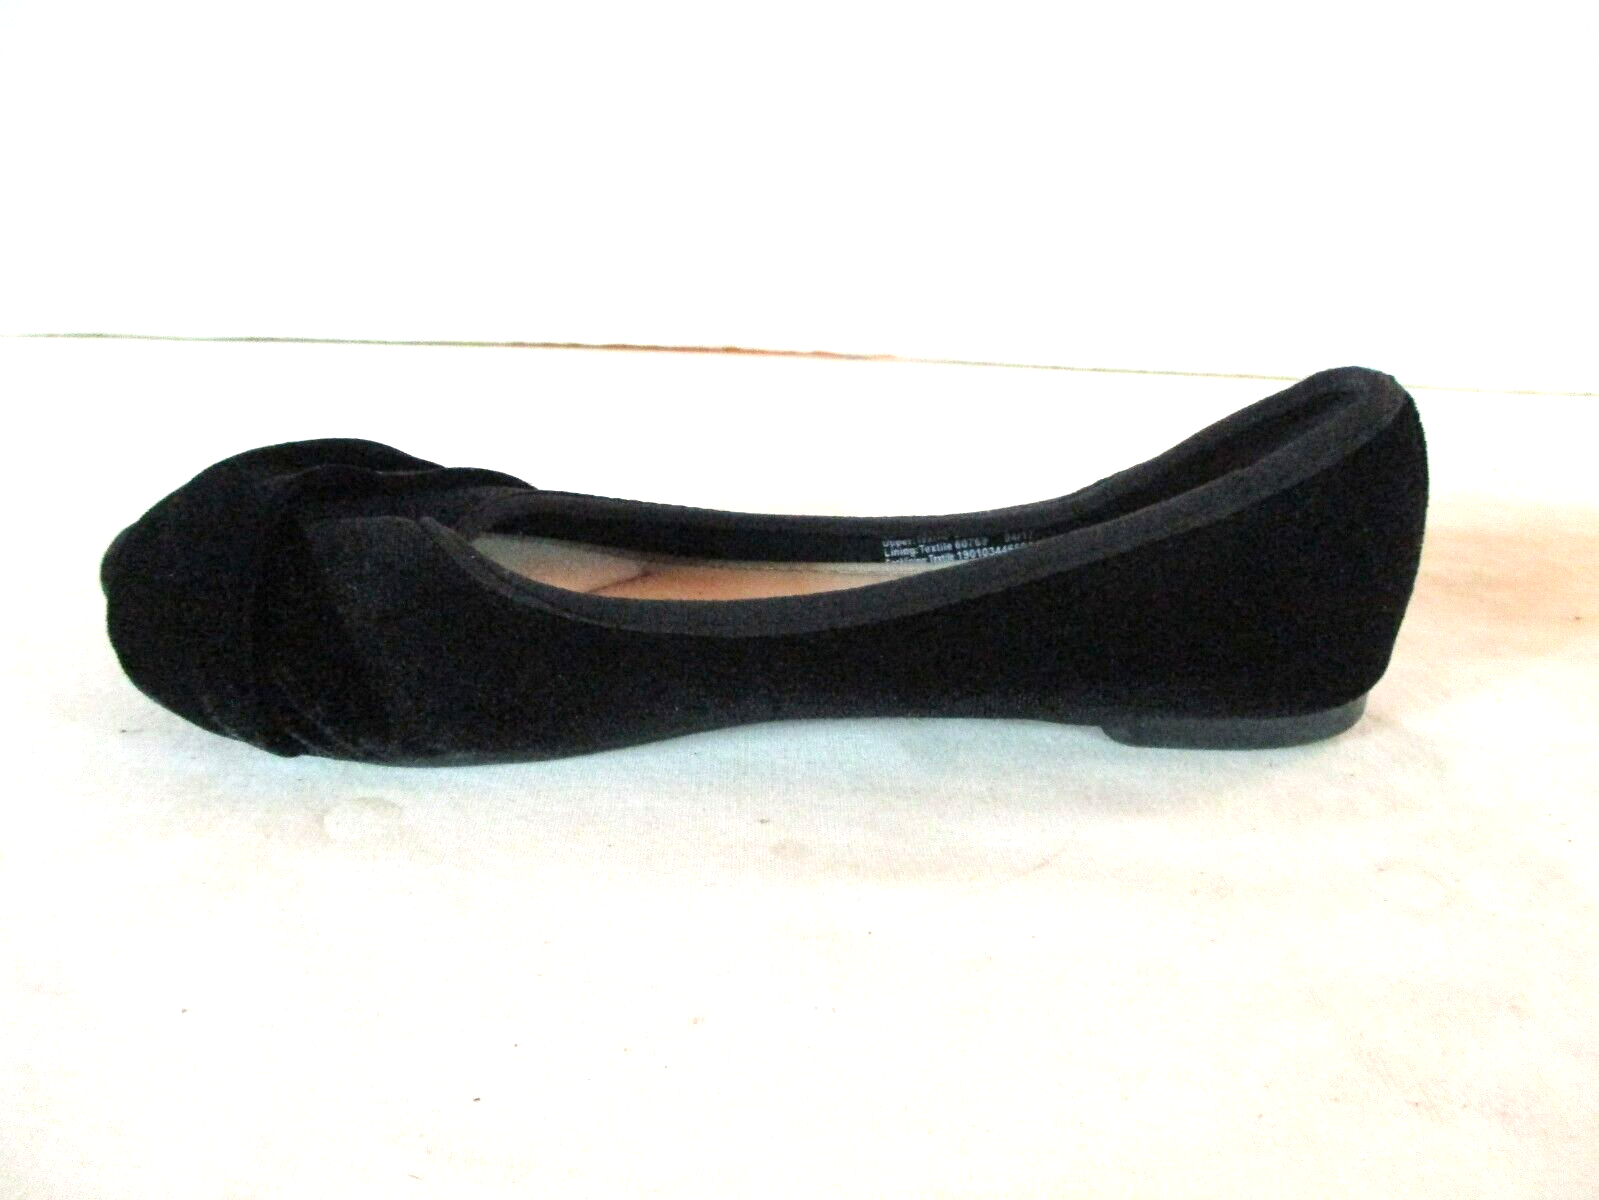 Primary image for SO Black Suede Flats Comfort Loafers Shoes Women's 7 M (SW47)NWT